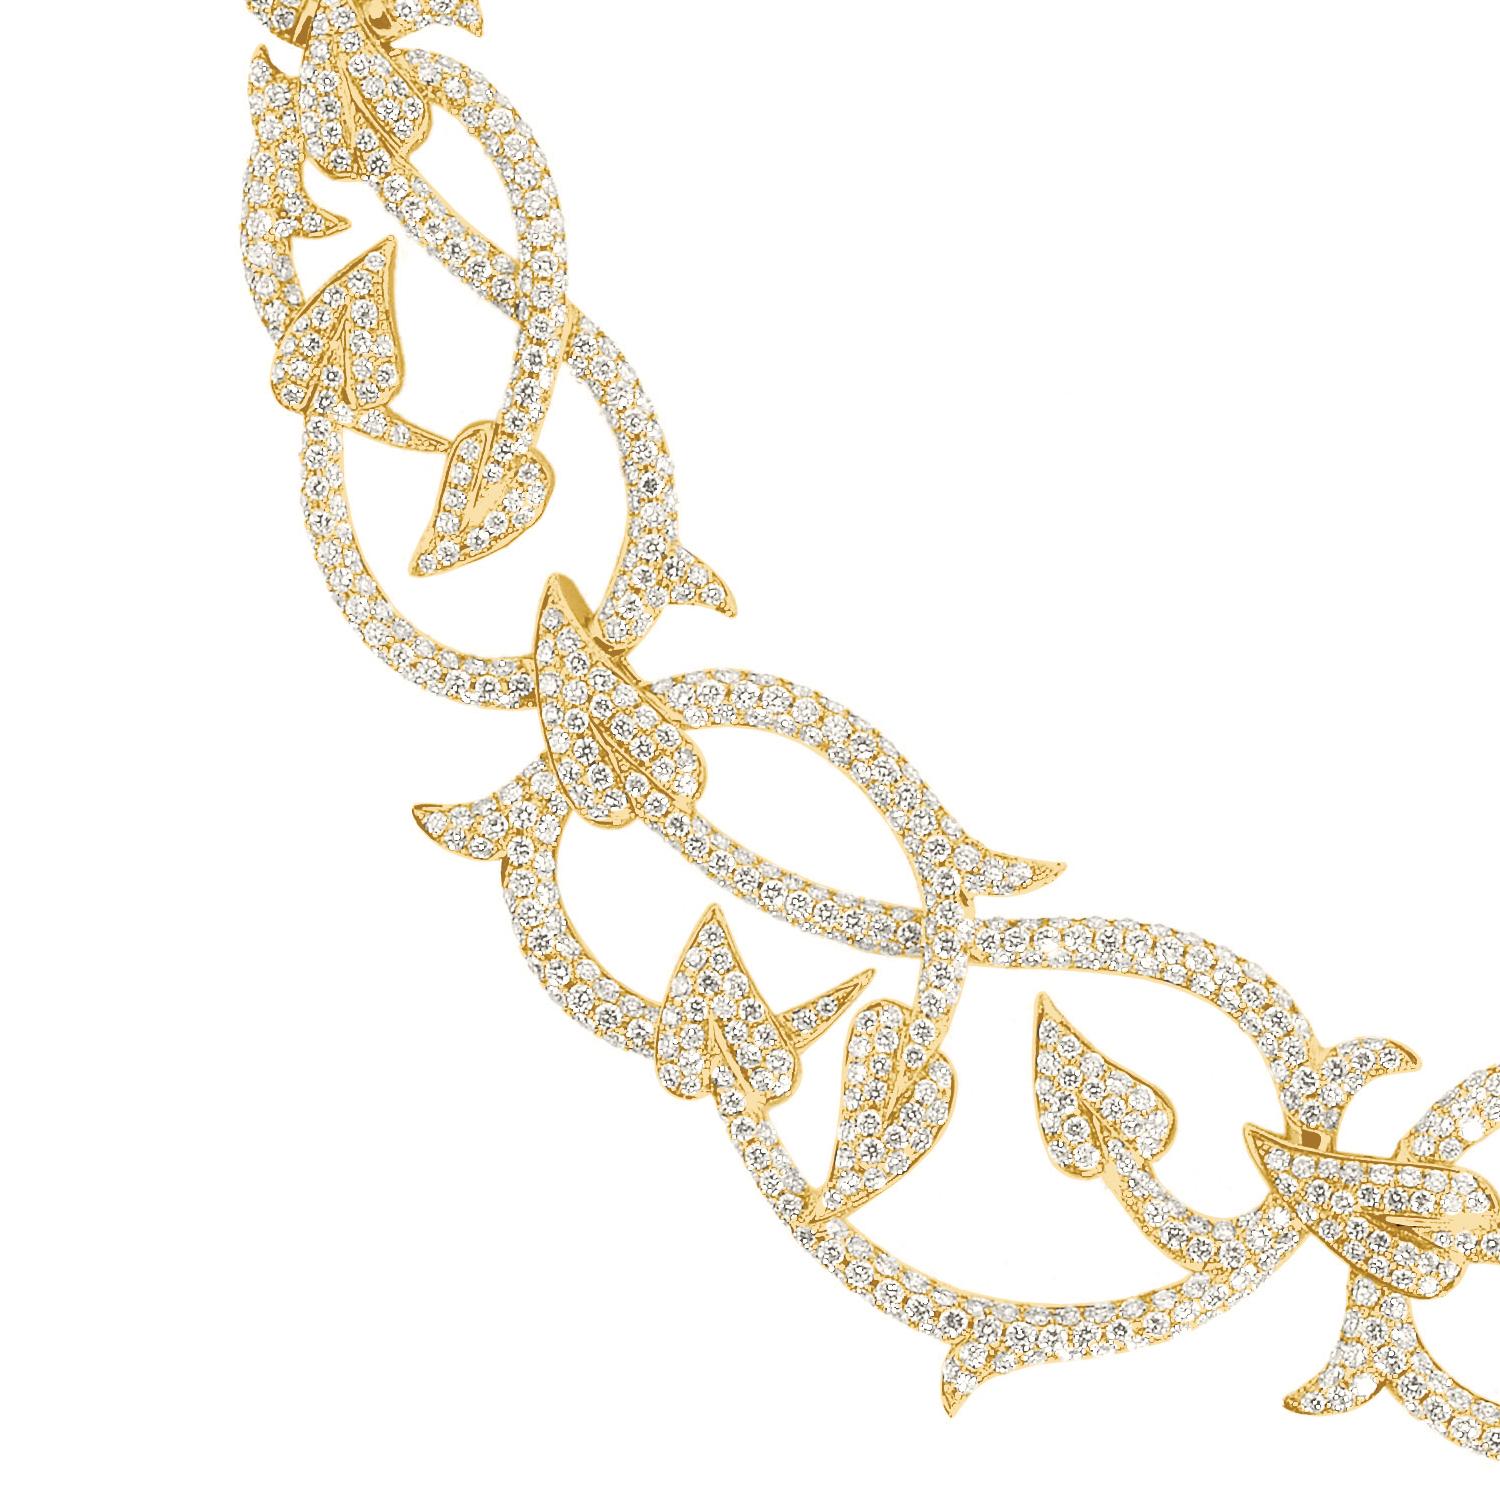 Poison Ivy Collar set in 18ct yellow Gold with white Diamond pavé (14.18ct).

Built on a foundation of 40 years of technical excellence, where Webster began his apprenticeship at the age of 16 in London’s Hatton Garden, this distinctly British